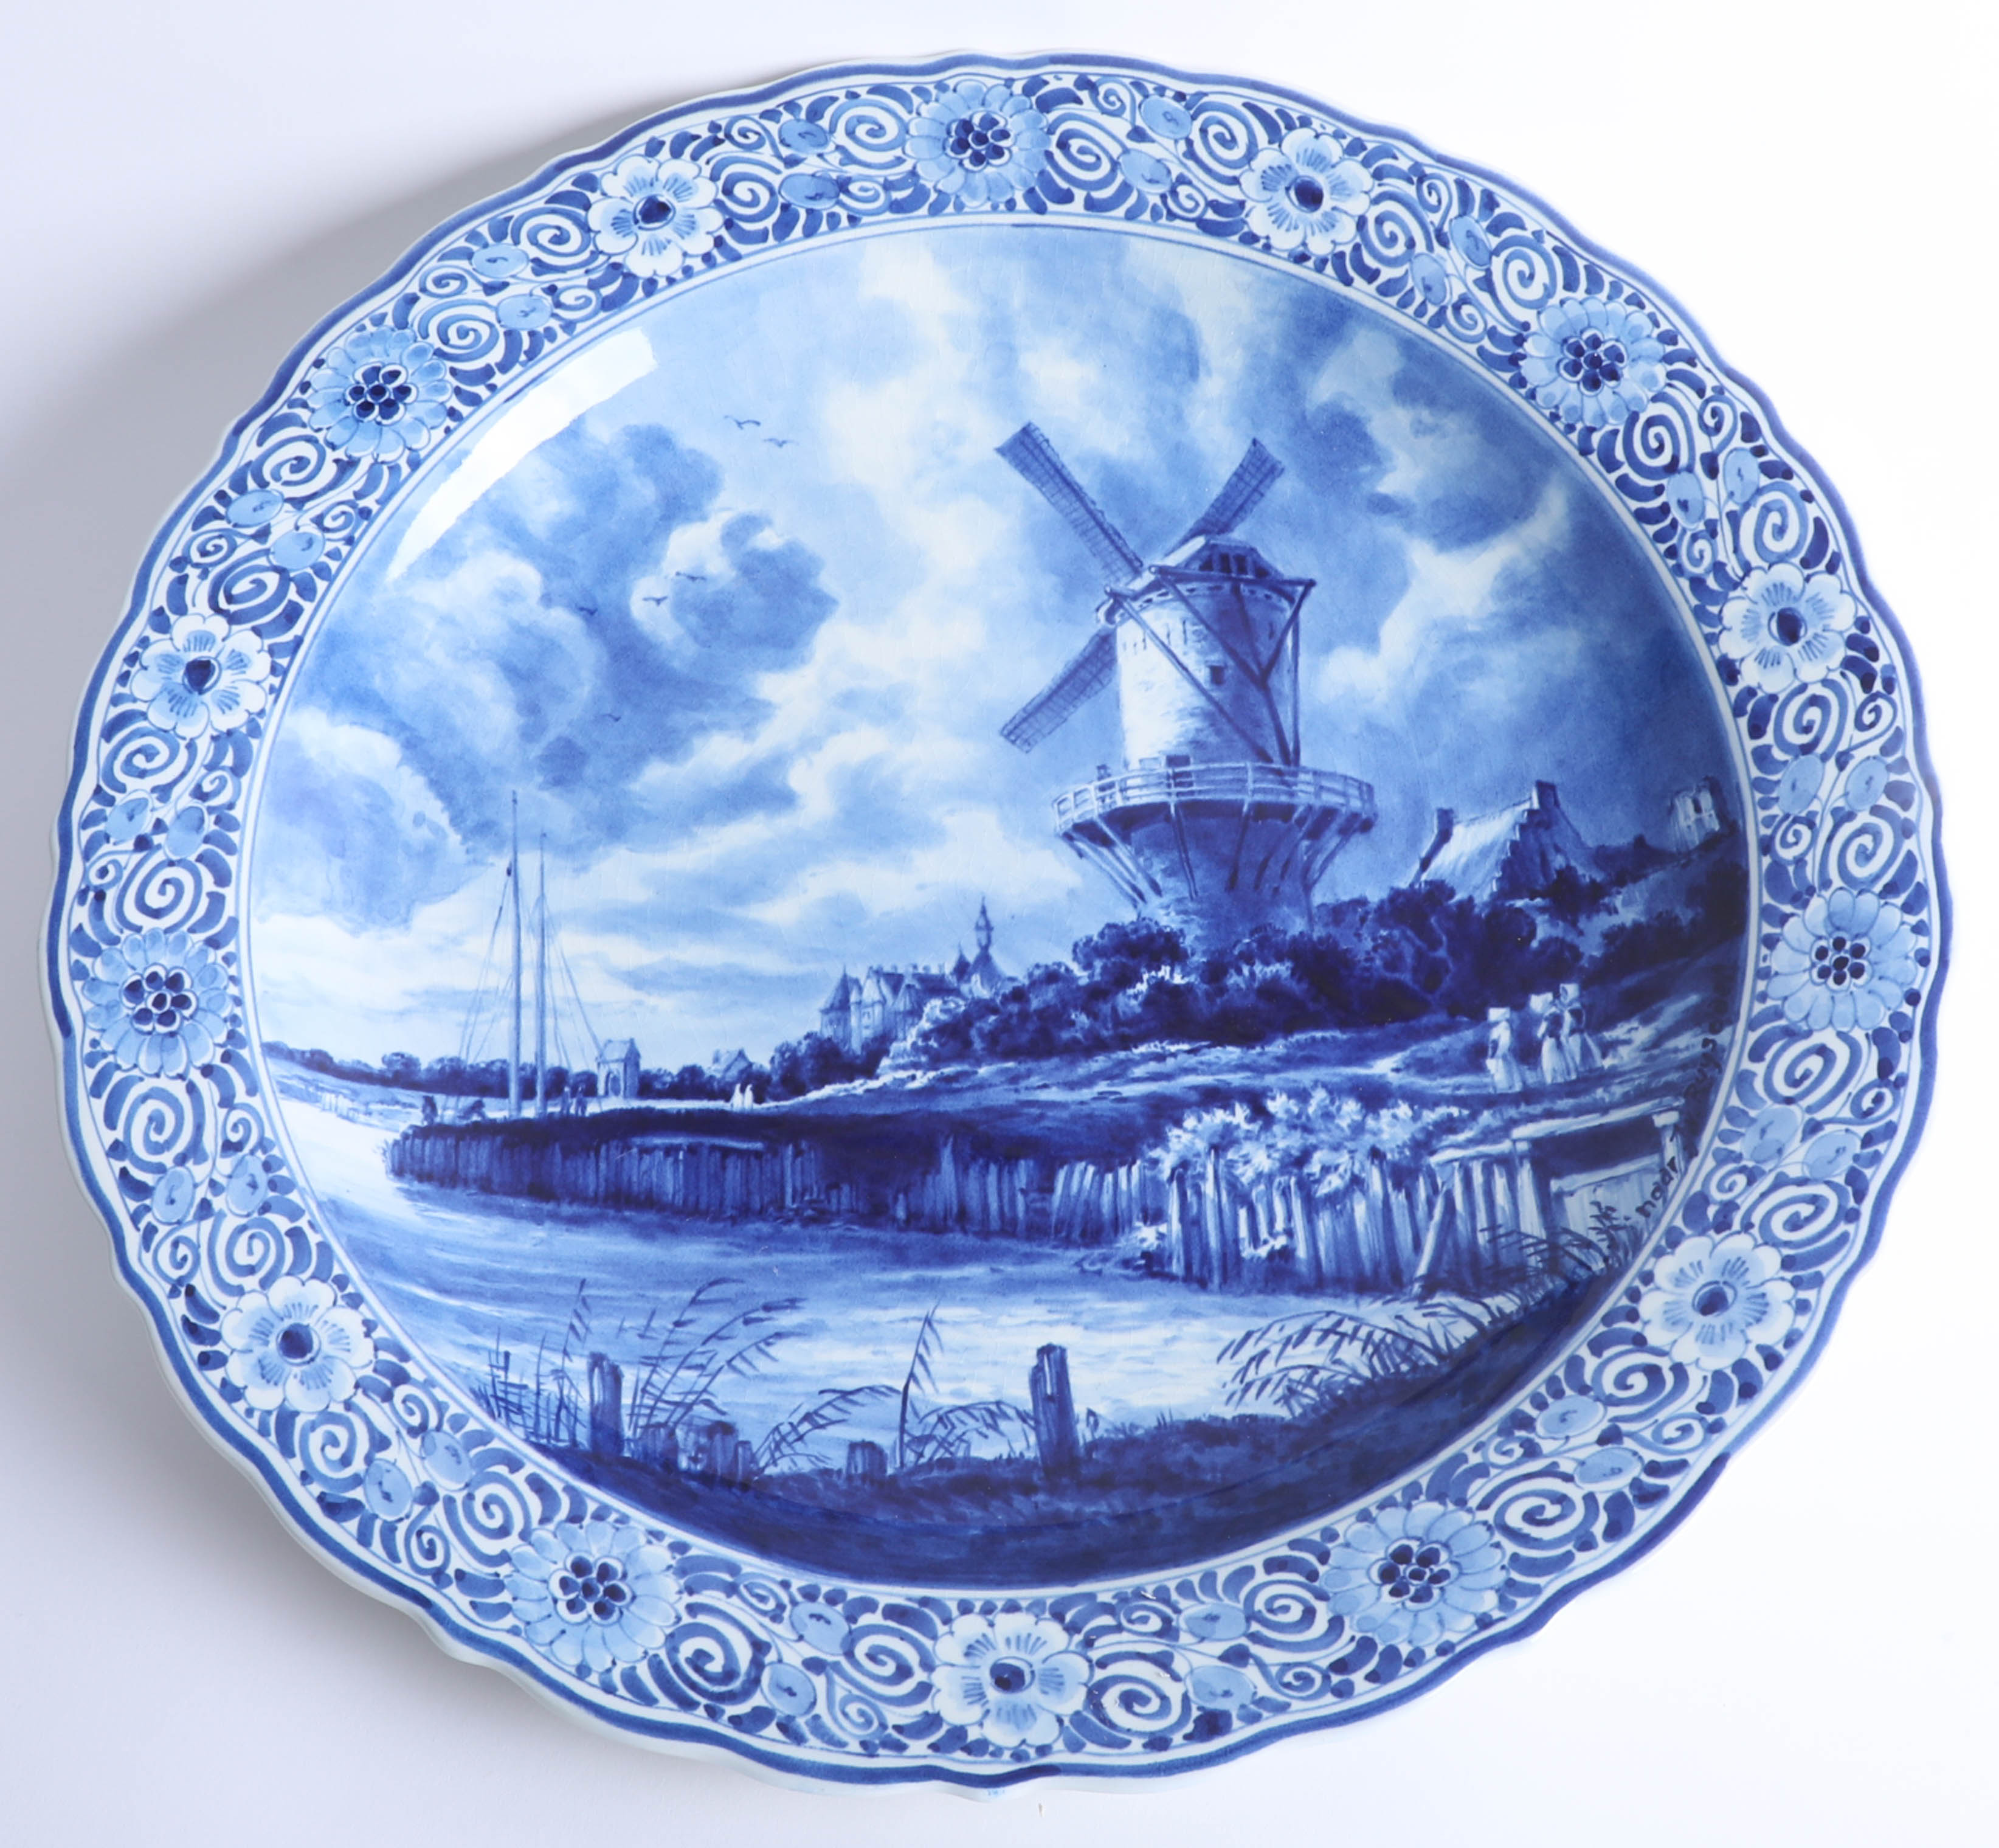 A Delft blue and white charger by Thooft and Labouchere, depicting a windmill on the banks of a